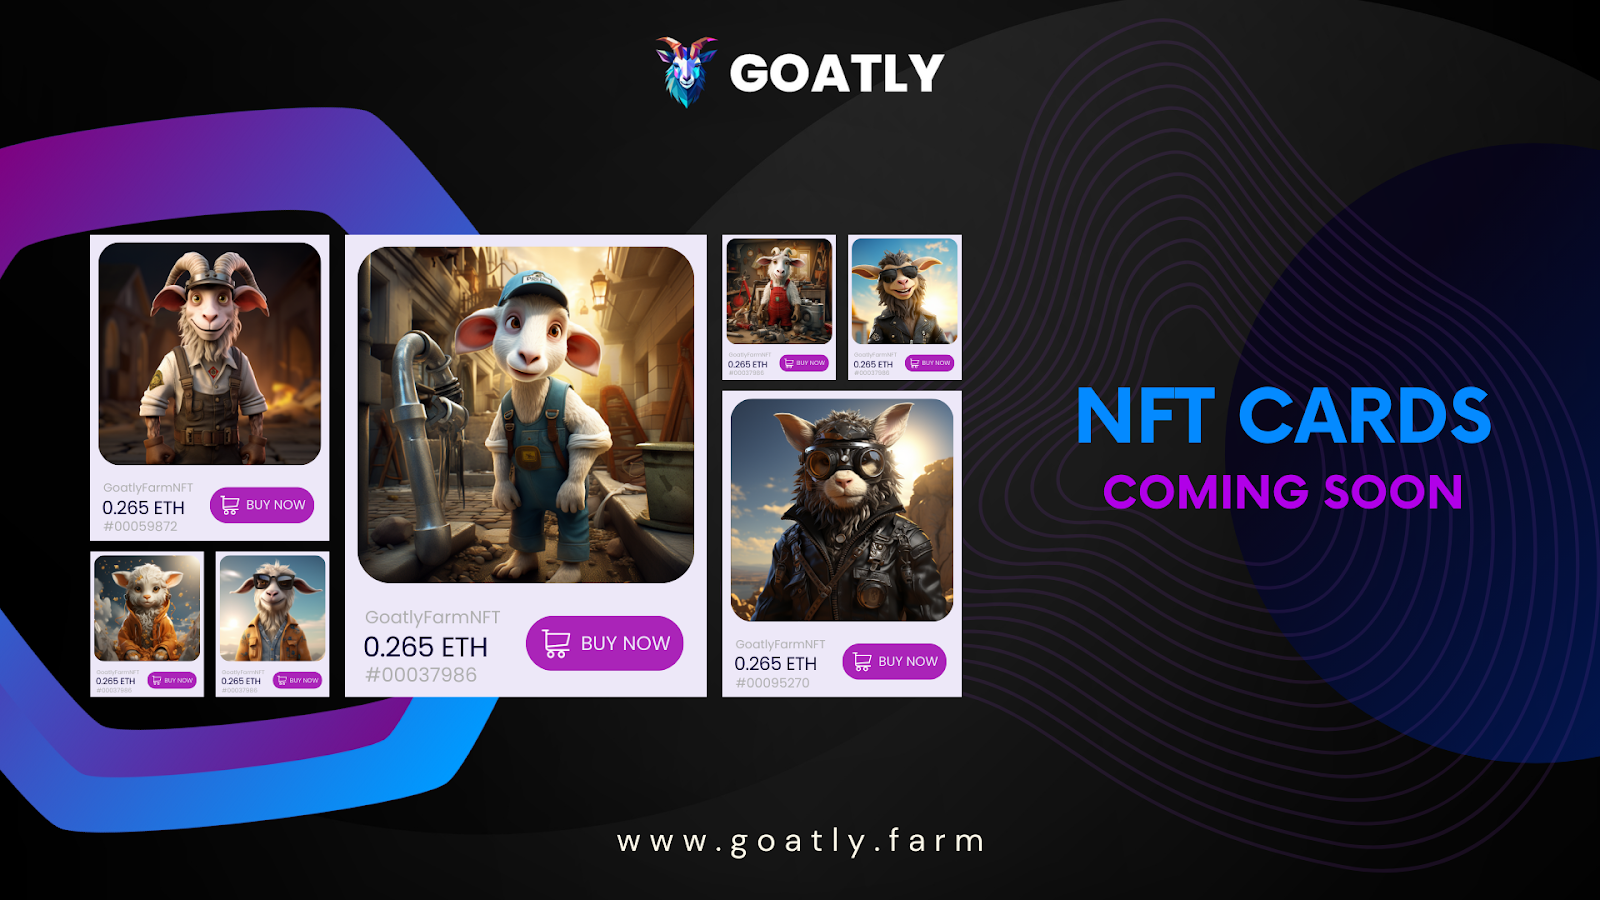 Goatly Farm Crypto Project Launches Exciting Staking Program